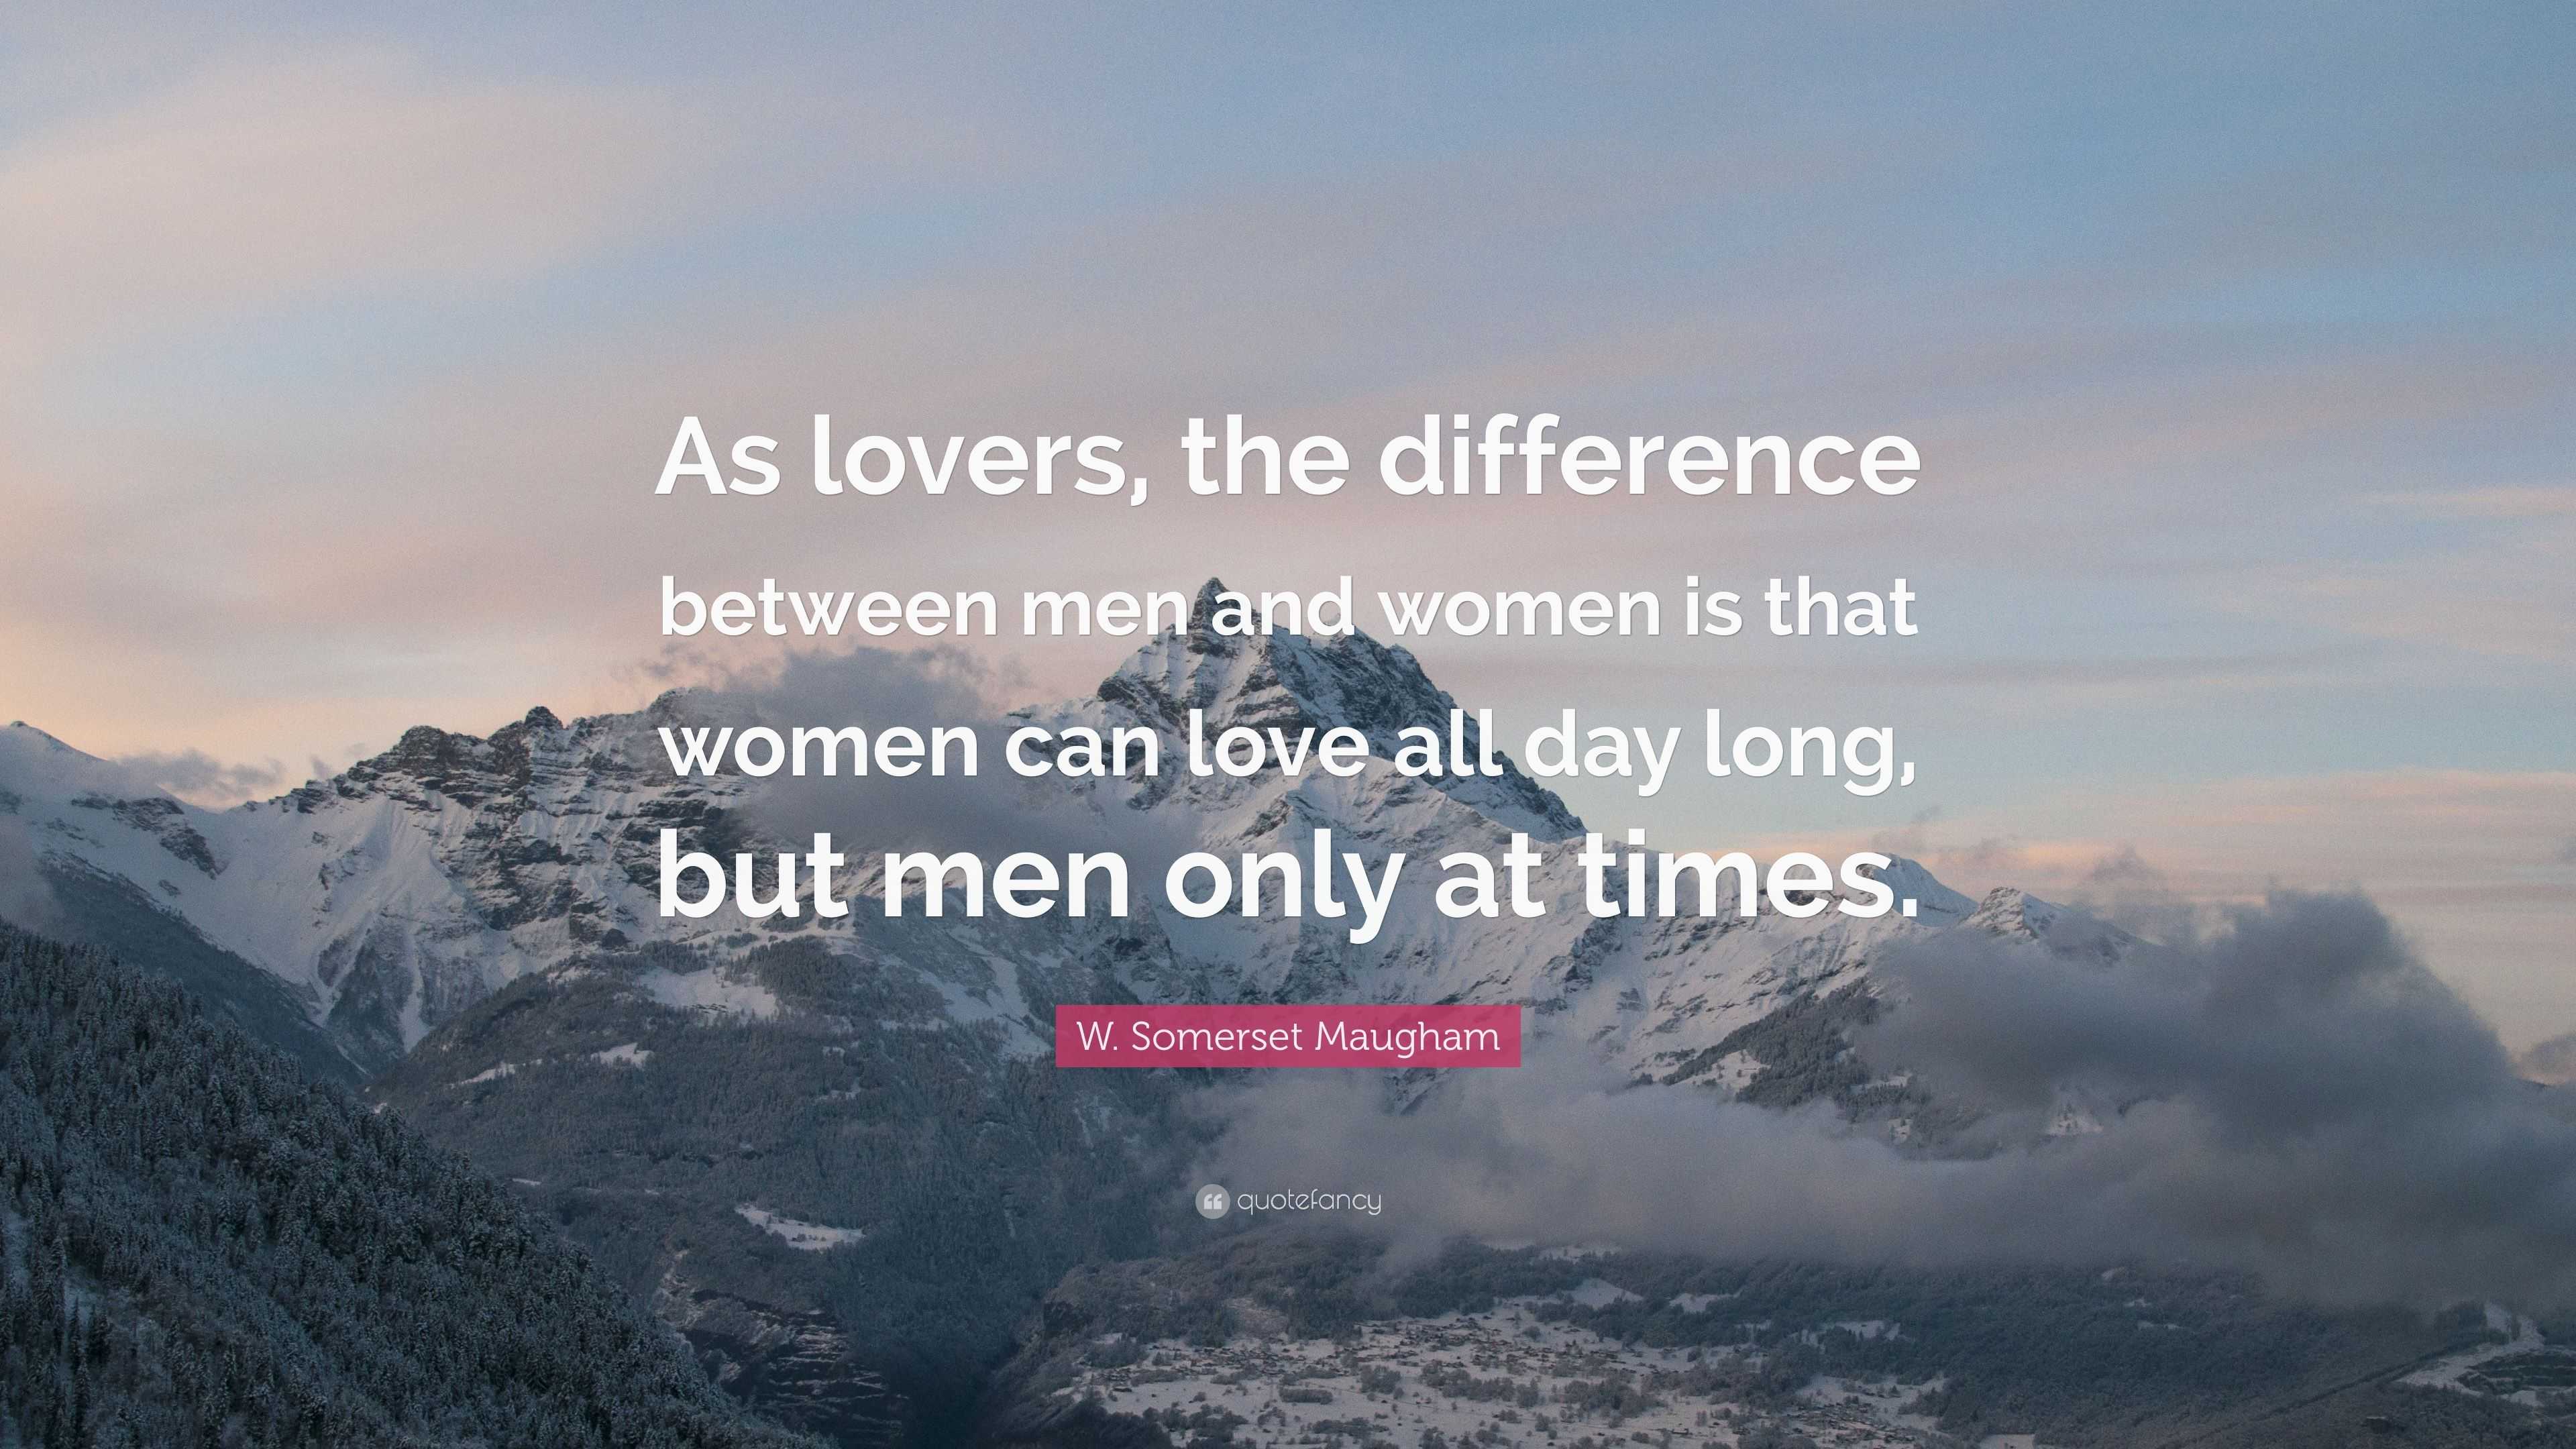 W. Somerset Maugham Quote: “As lovers, the difference between men and ...